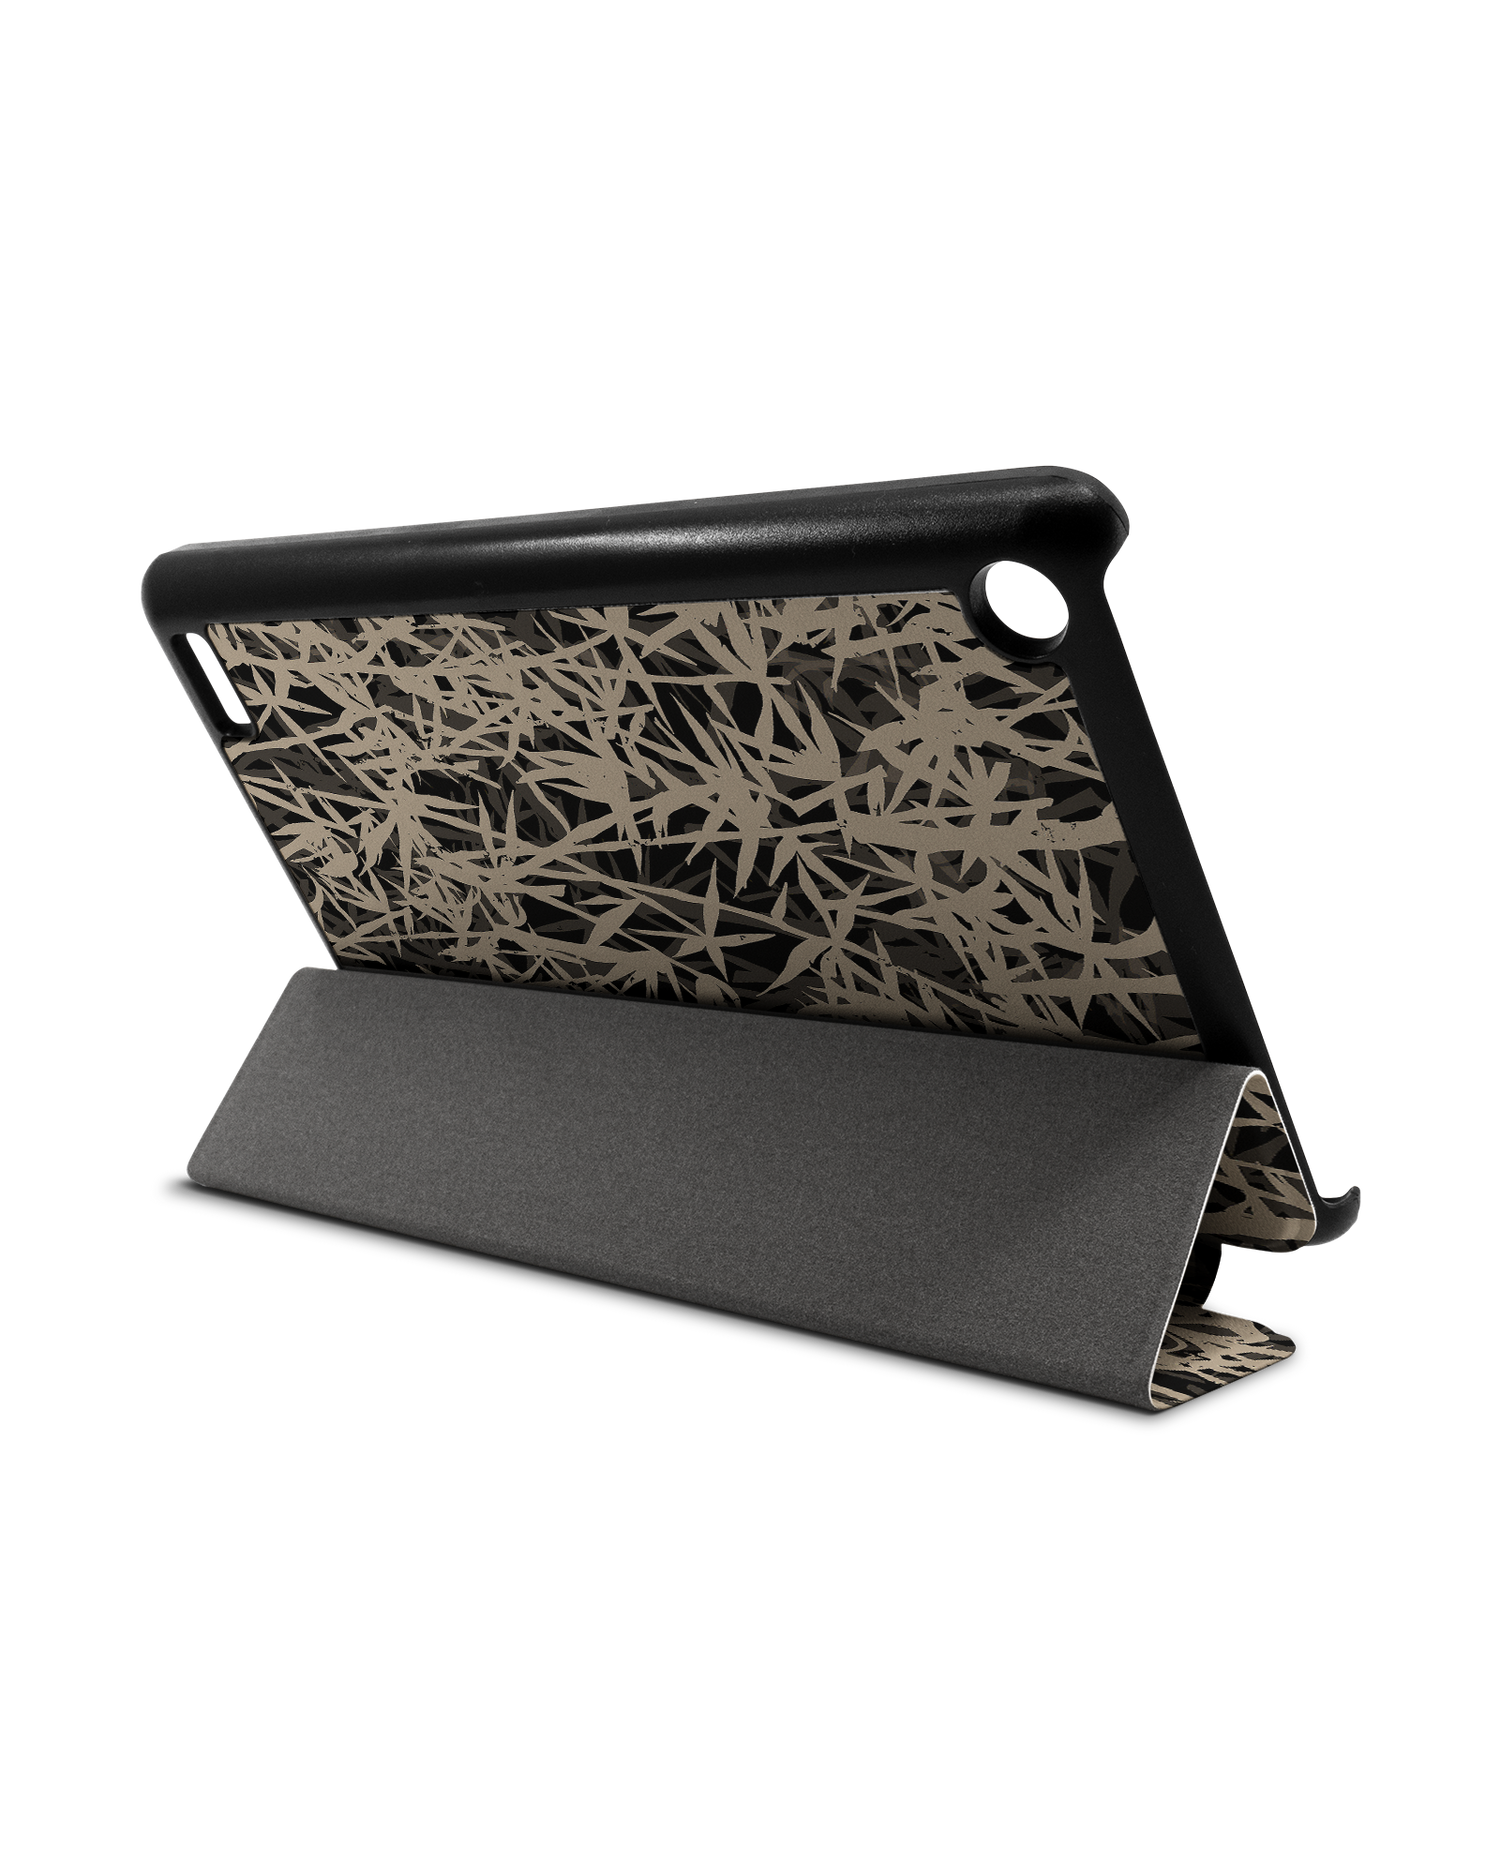 Bamboo Pattern Tablet Smart Case for Amazon Fire 7: Used as Stand